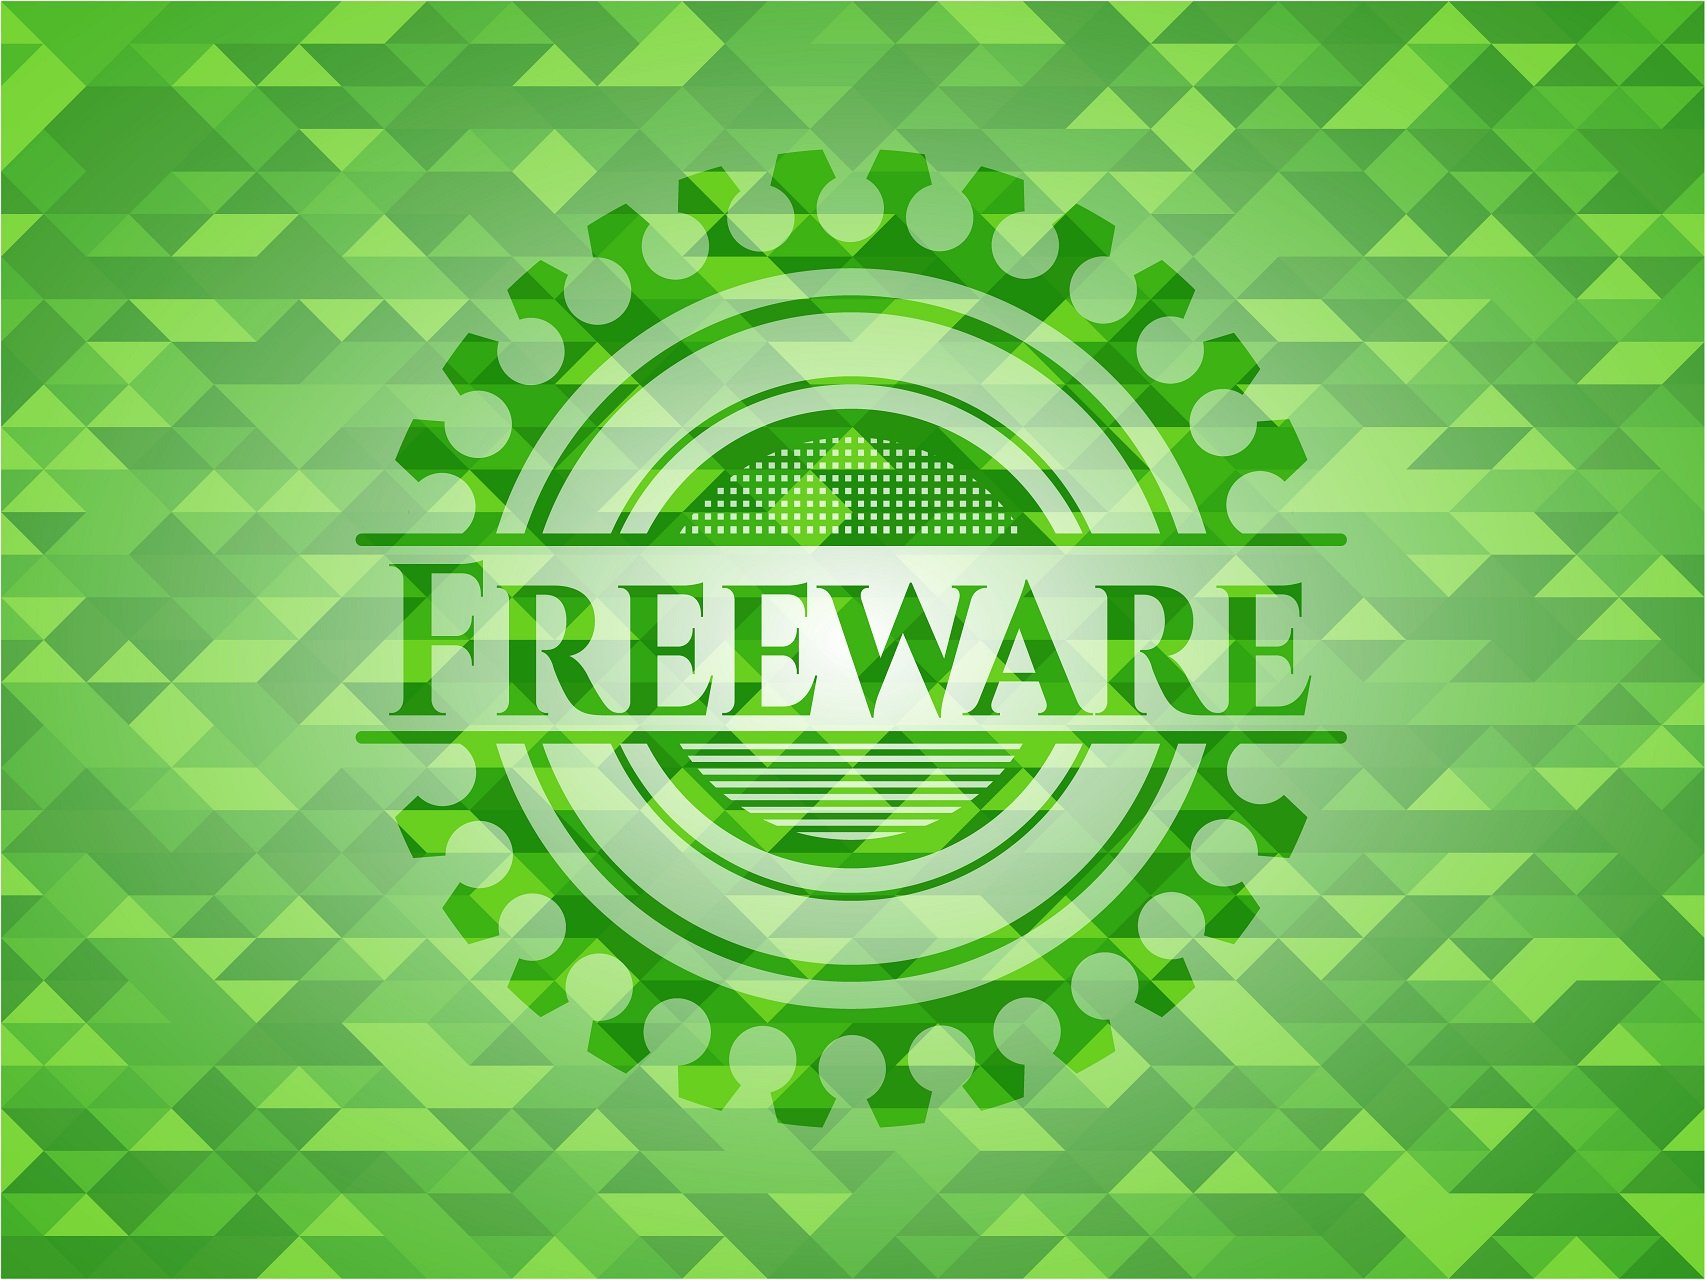 What are the best 2020 freeware for Windows